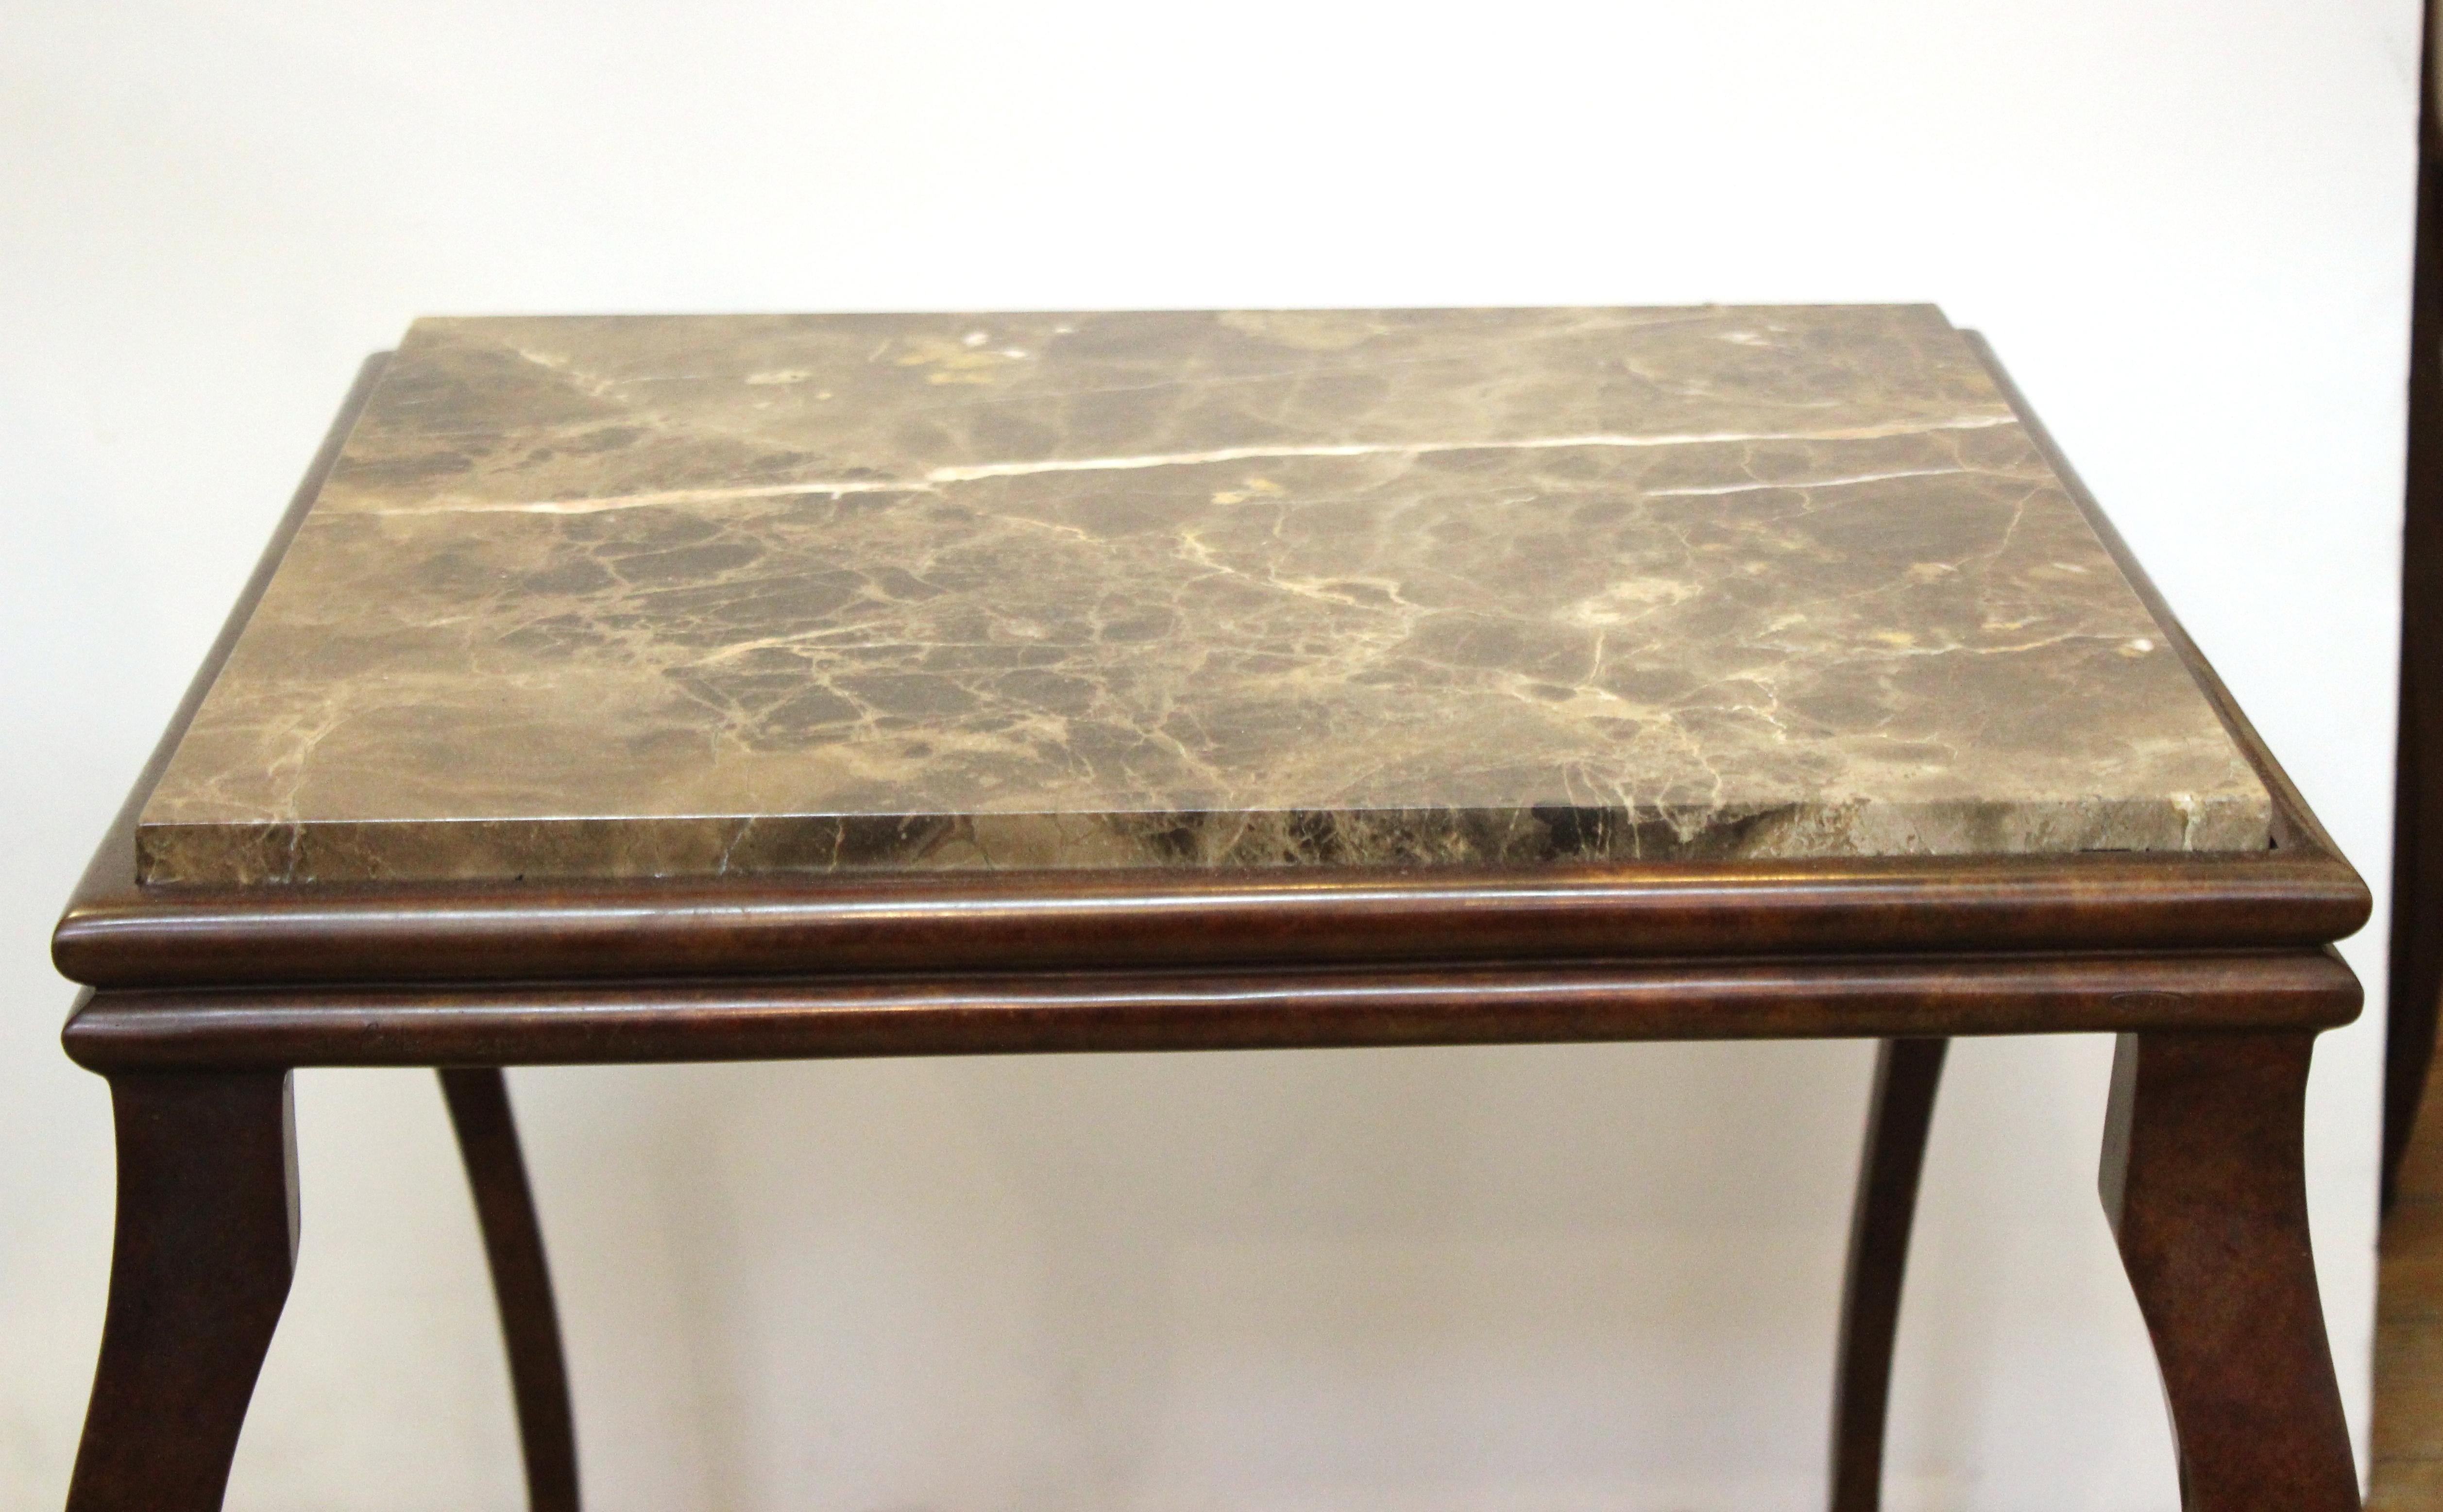 Modern side table with bronze structure and cabriole legs and a square marble top. The piece is in great vintage condition with age-appropriate wear.